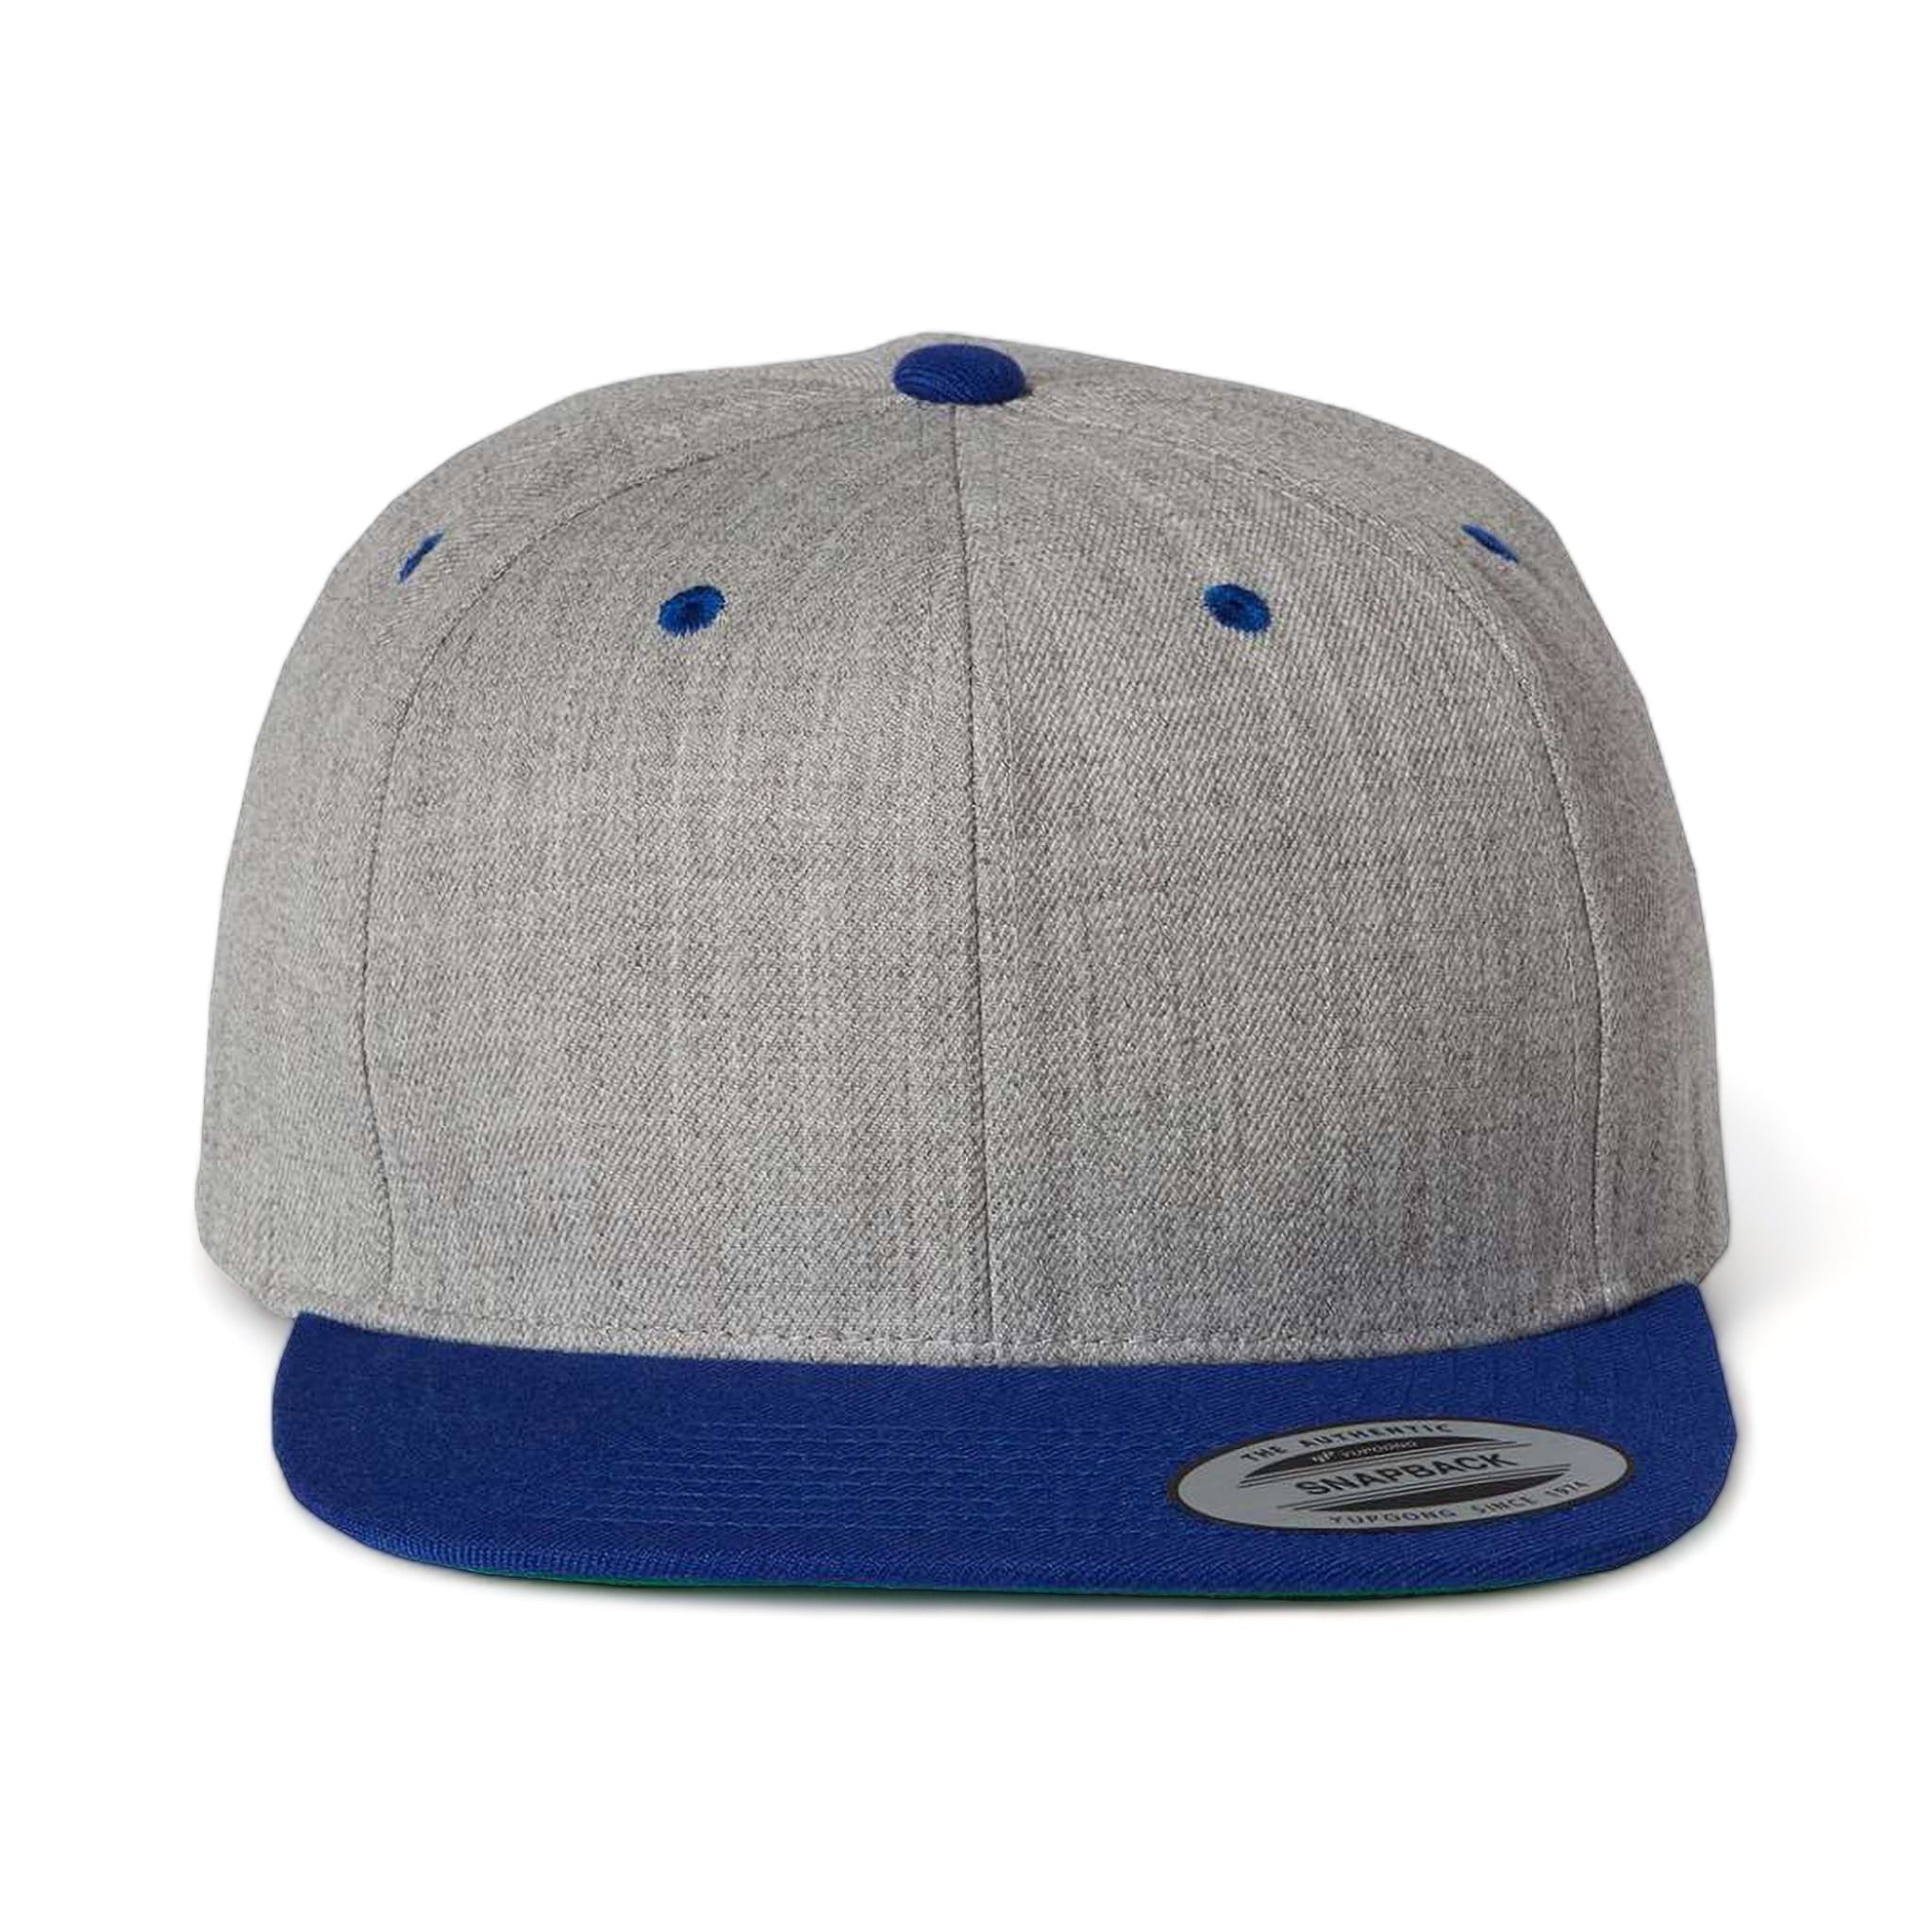 Front view of YP Classics 6089M custom hat in heather grey and royal